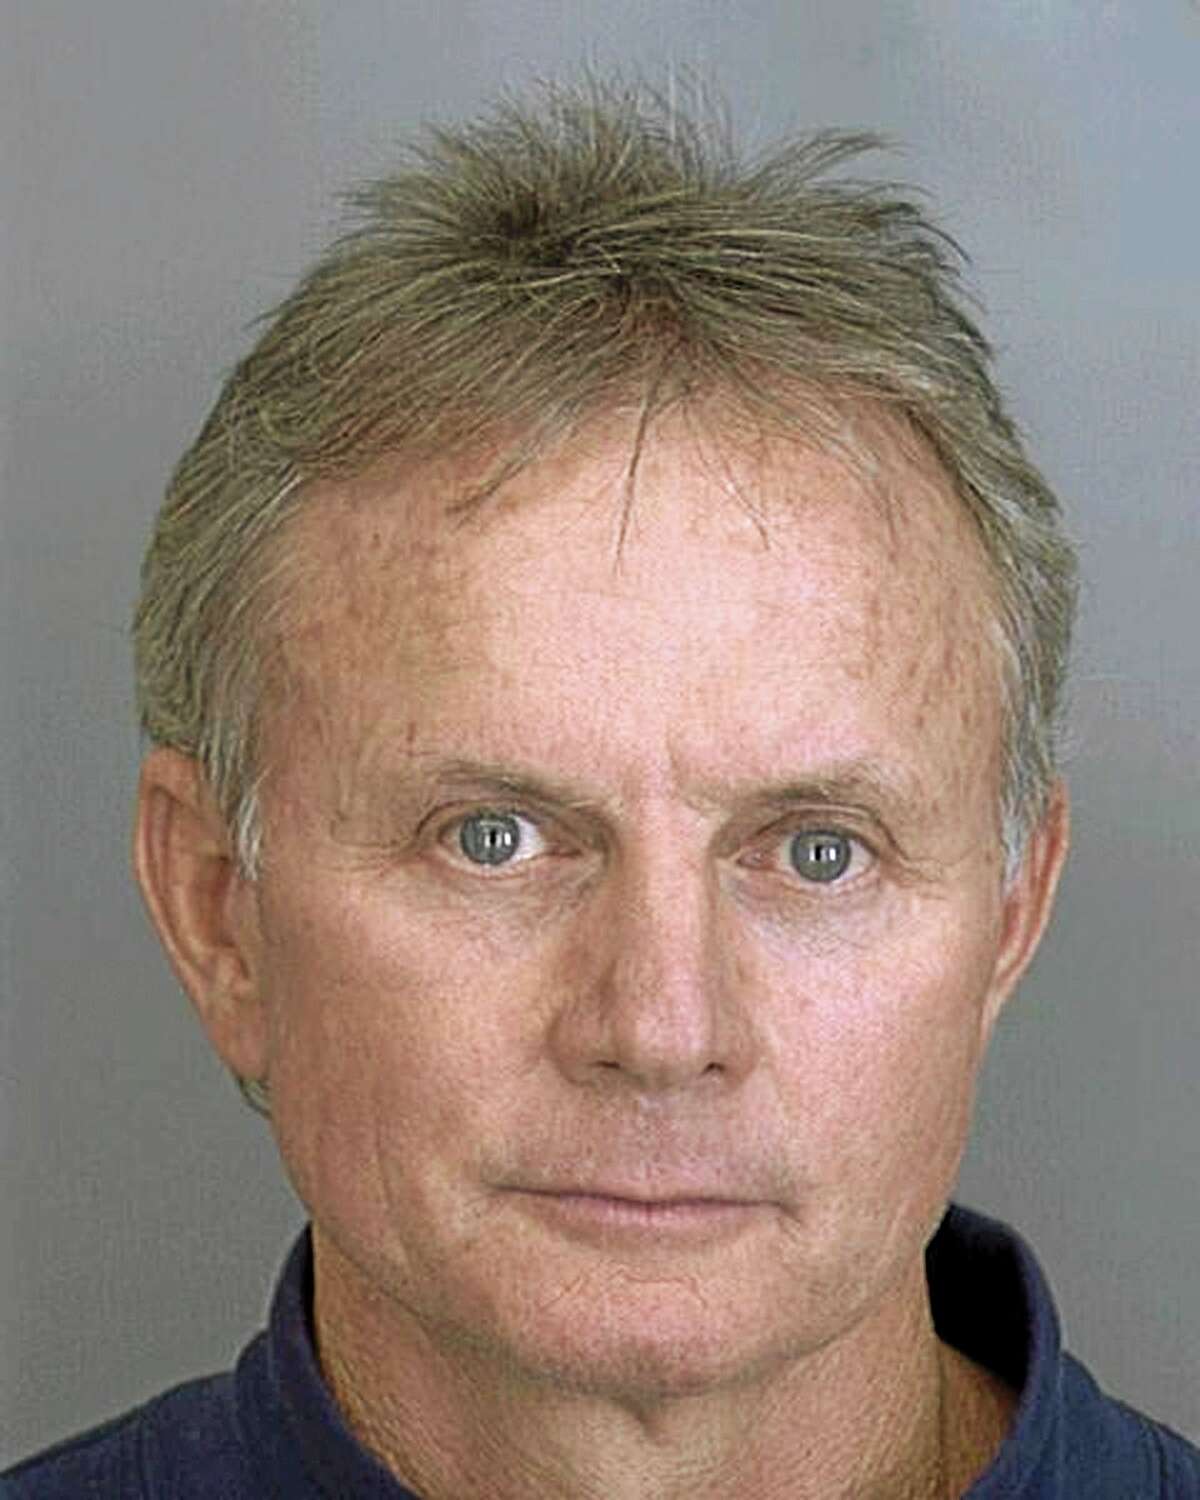 FILE - This Nov. 2, 2001 booking file photo, provided by the Dallas County Sheriff's Department show Dr. Wayne Scott Harrington, a Tulsa, Okla., dentist. The oral surgeon whose filthy clinics led to the testing of thousands of patients for HIV and hepatitis permanently surrendered his professional license on Friday, Aug. 22, 2014. (AP Photo/Dallas County Sheriff Department, File)